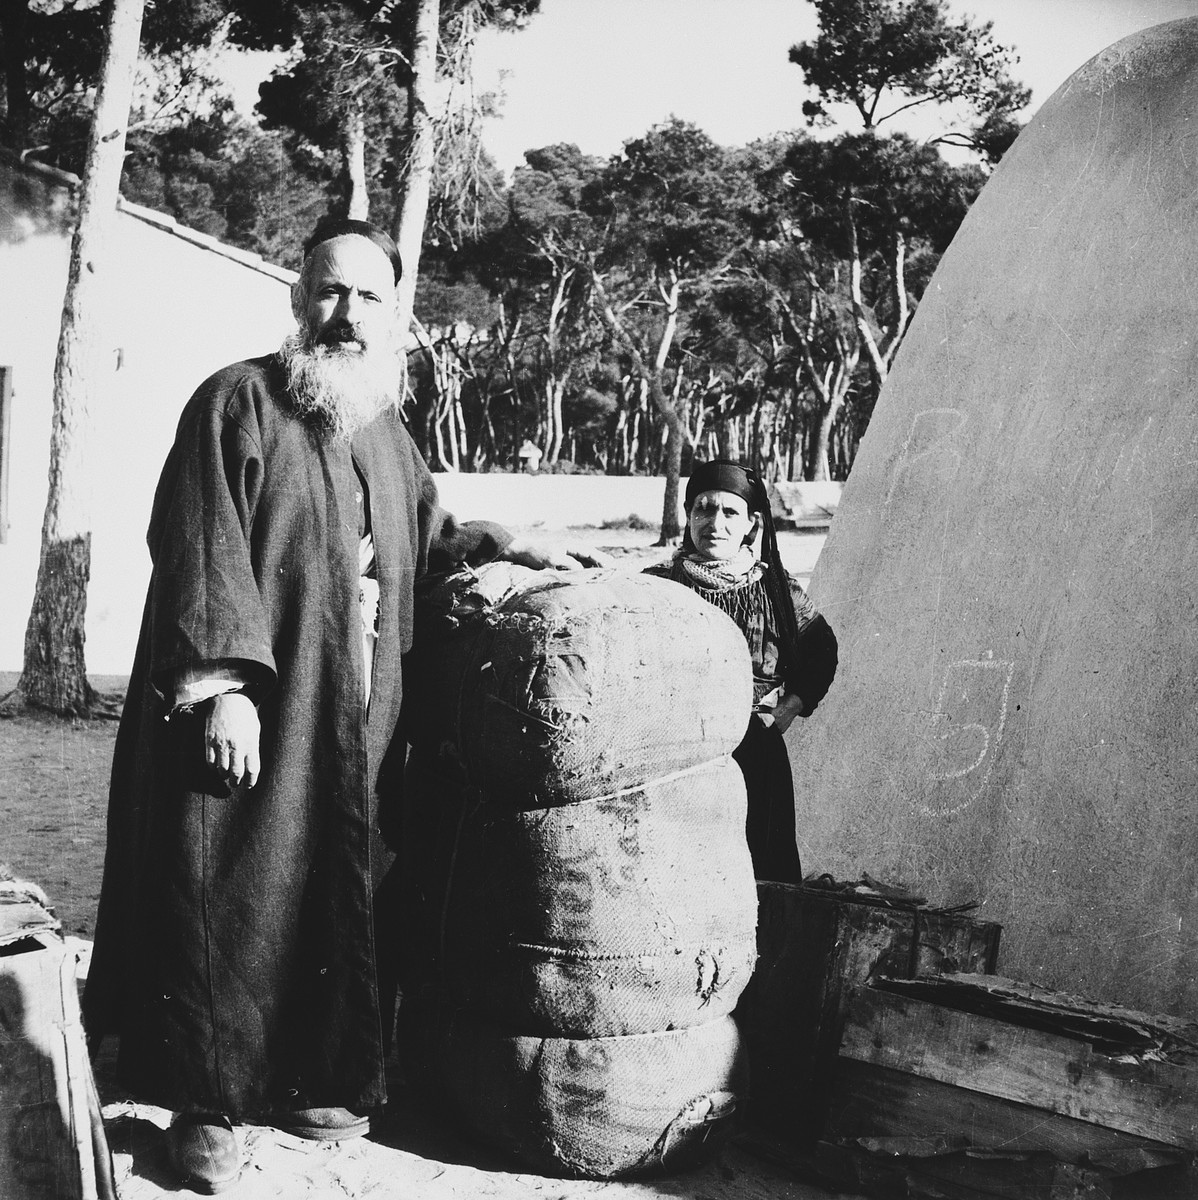 A Morrocan-Jewish man and woman stand next to a large bundle in the Los Arenas camp while waiting to immigrate to Palestine.